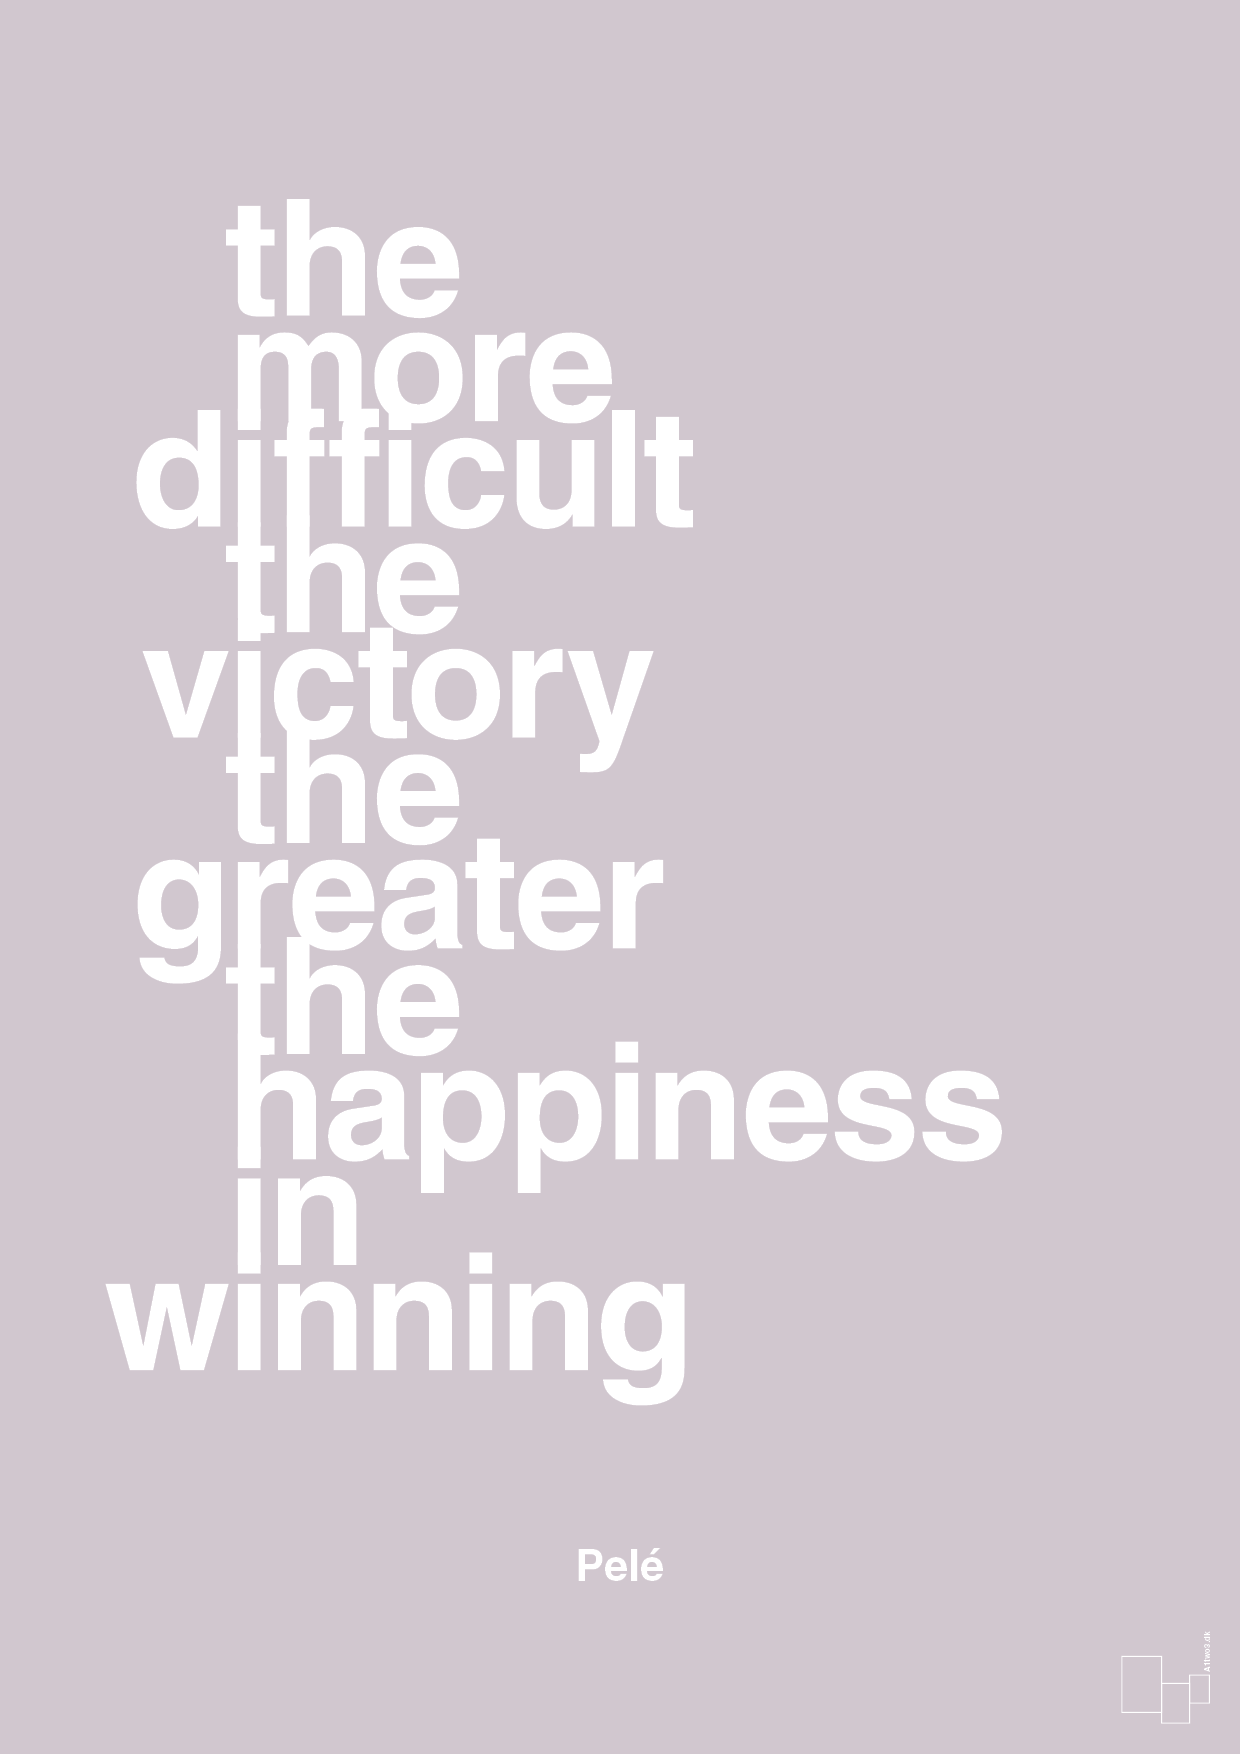 the more difficult the victory the greater the happiness in winning - Plakat med Citater i Dusty Lilac